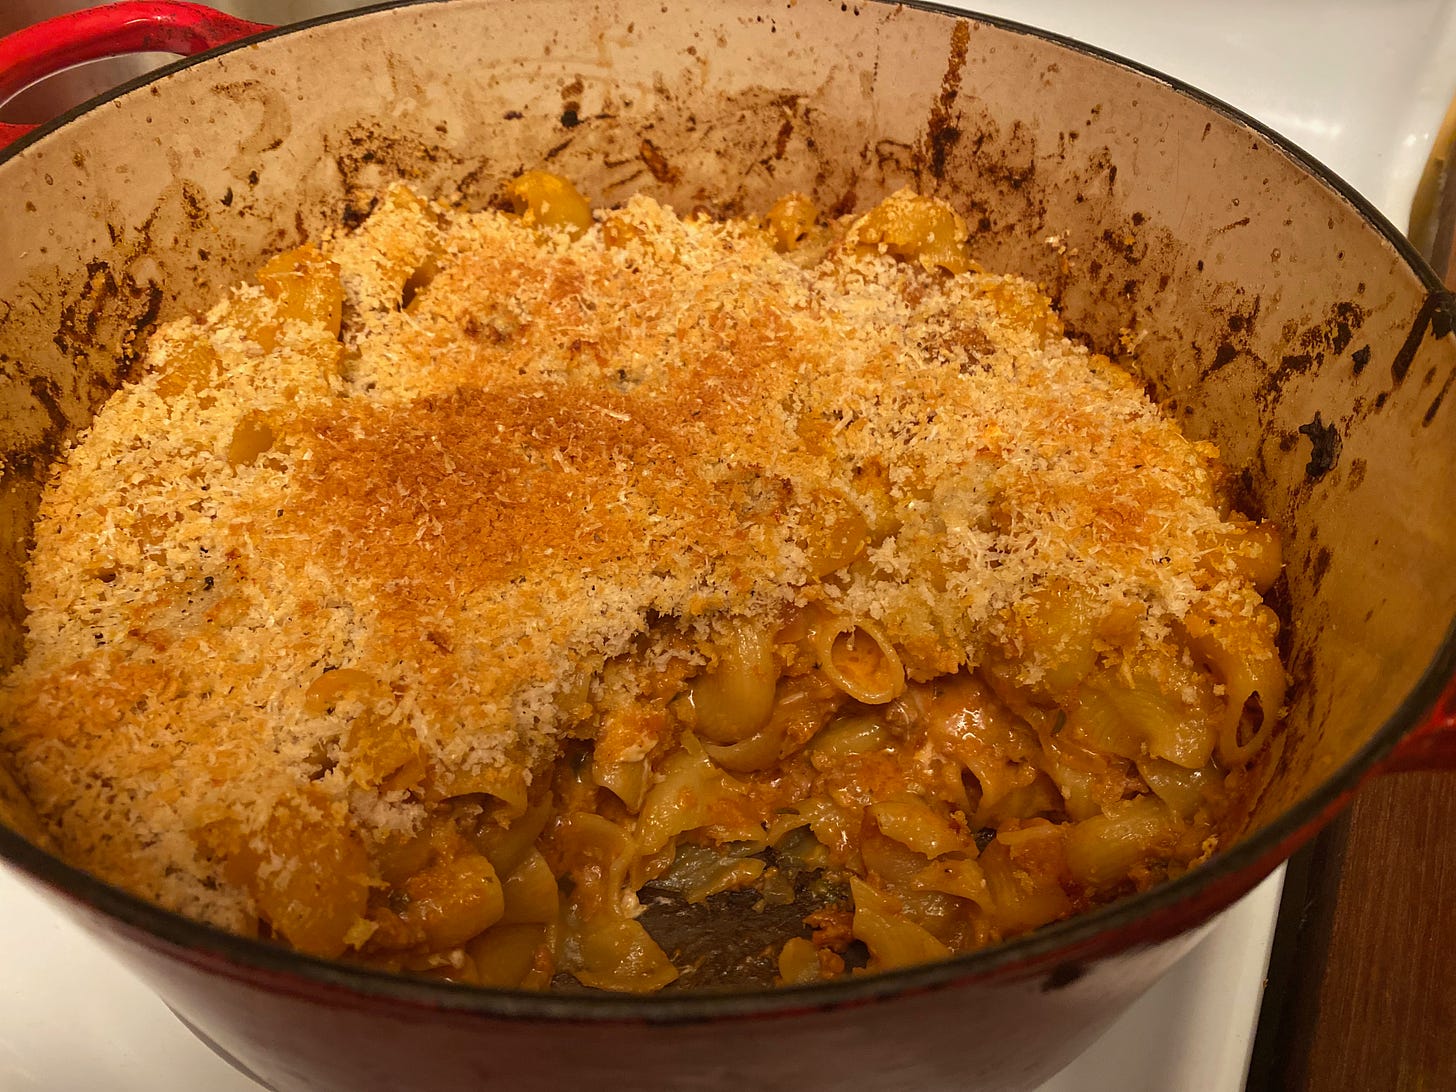 A cheesy pasta casserole in a large Dutch oven. The top is covered in golden brown bread crumbs.